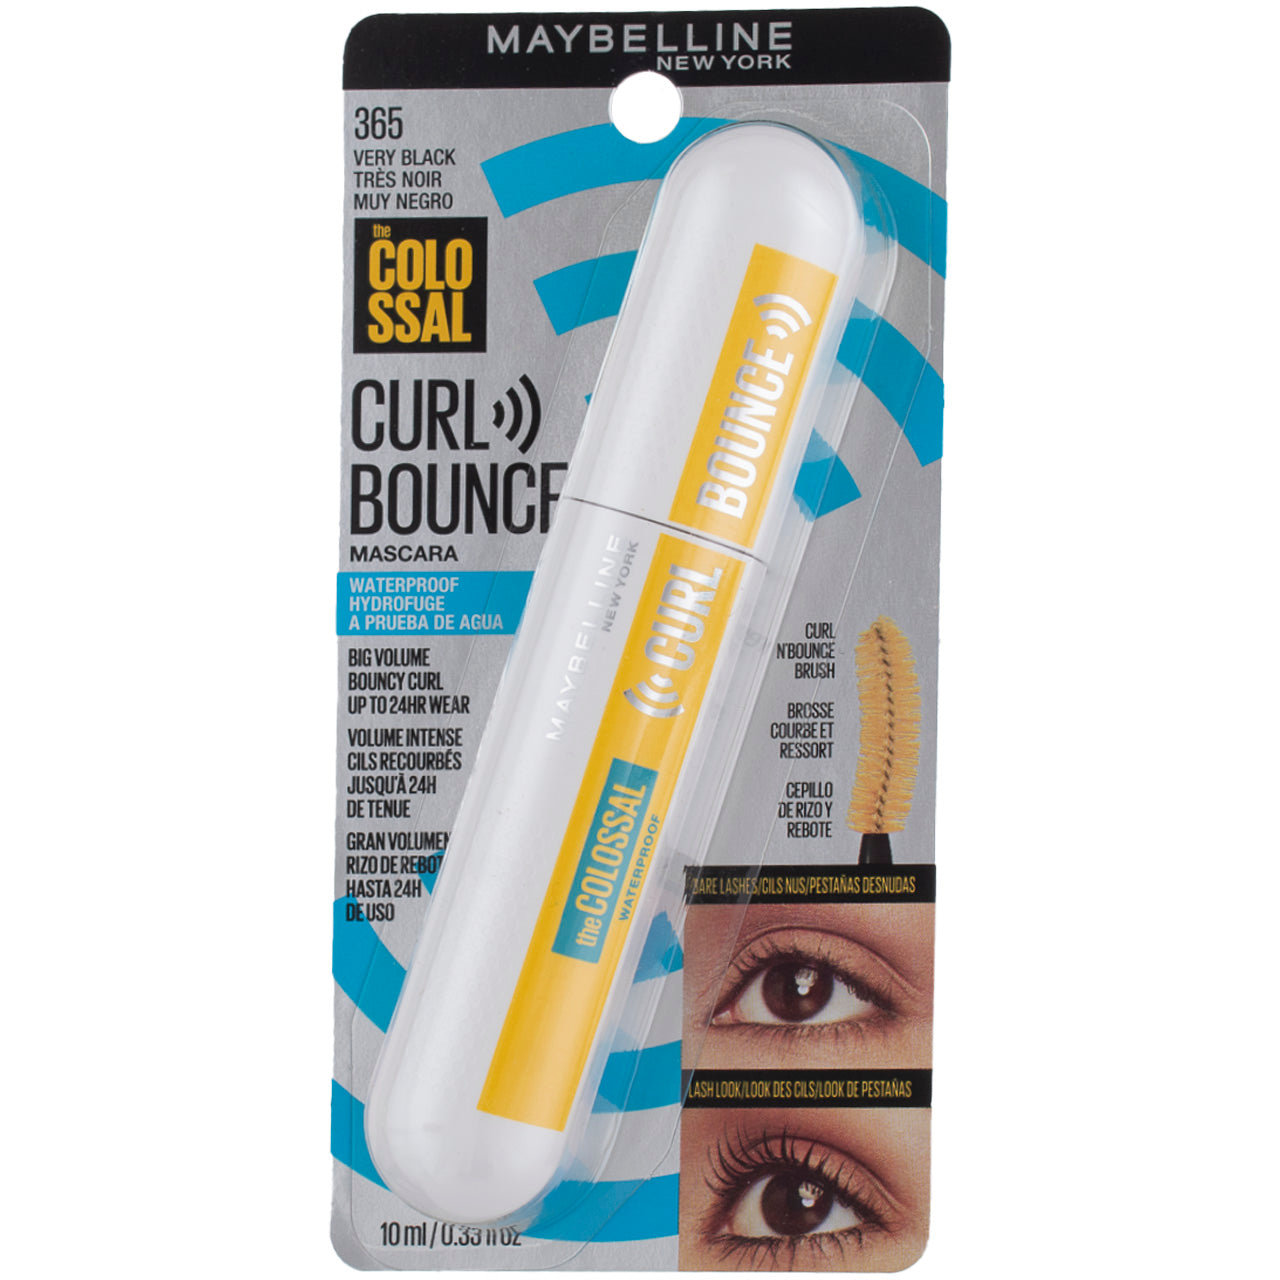 Bouncing – Vitabox Very Colossal The Maybelline Black Curl fl 365, Mascara, 0.33